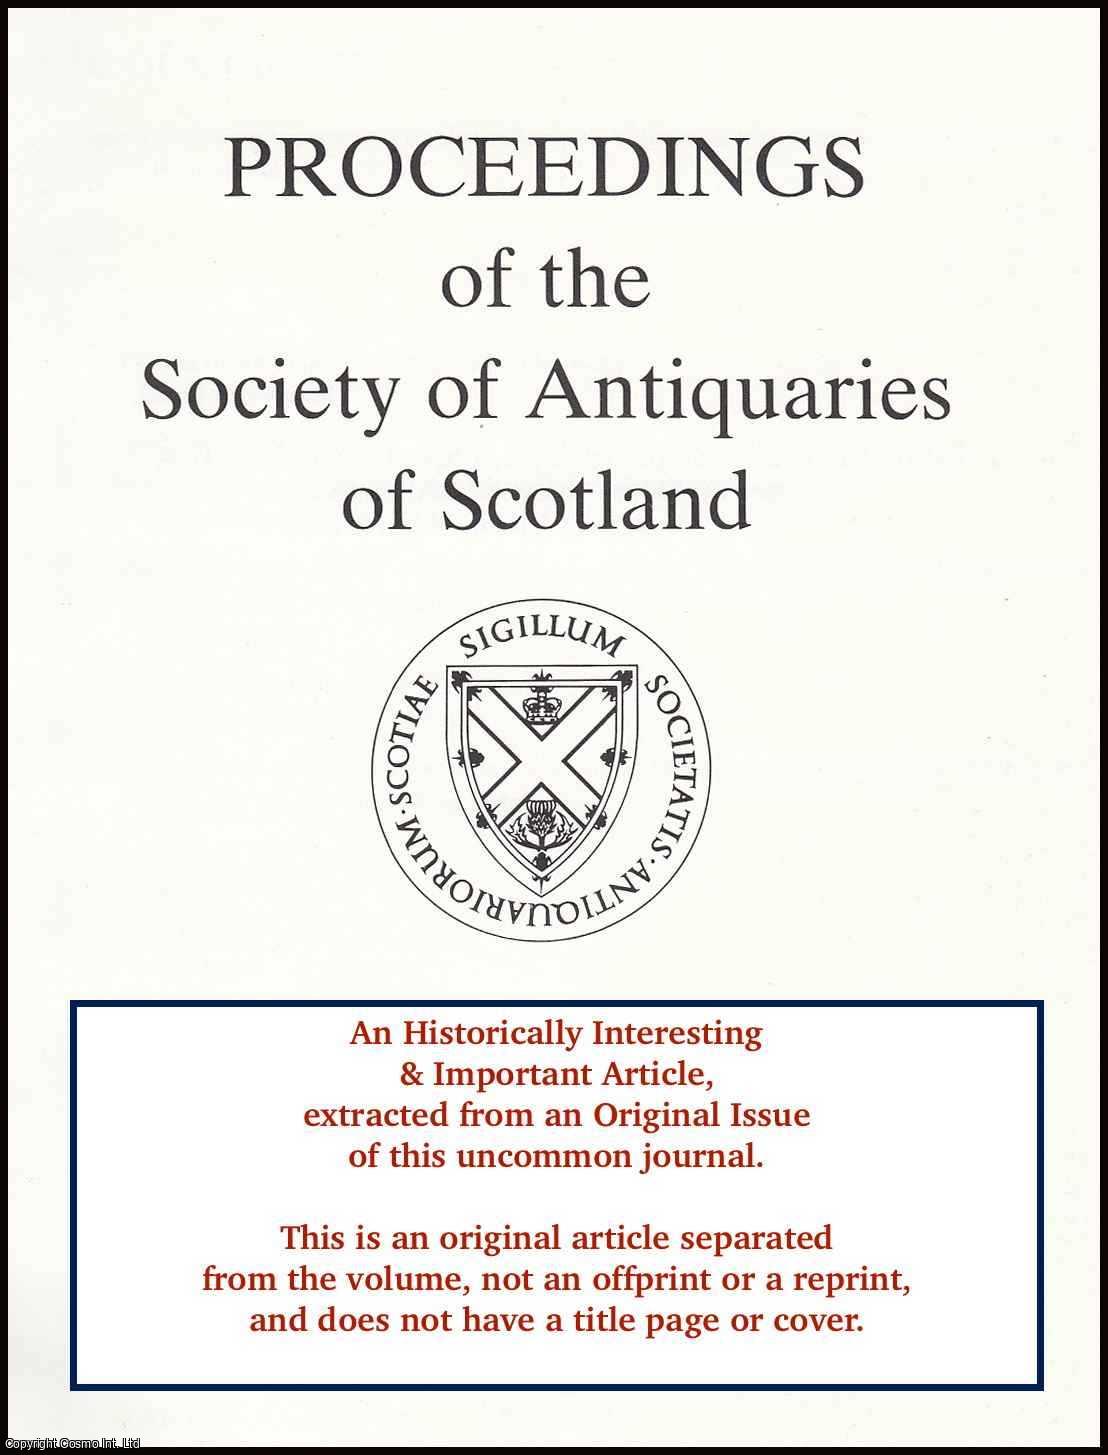 Cannell & John Lewis, John - Excavations at Sauchie Tower, Clackmannanshire. An original article from the Proceedings of the Society of Antiquaries of Scotland, 1997.